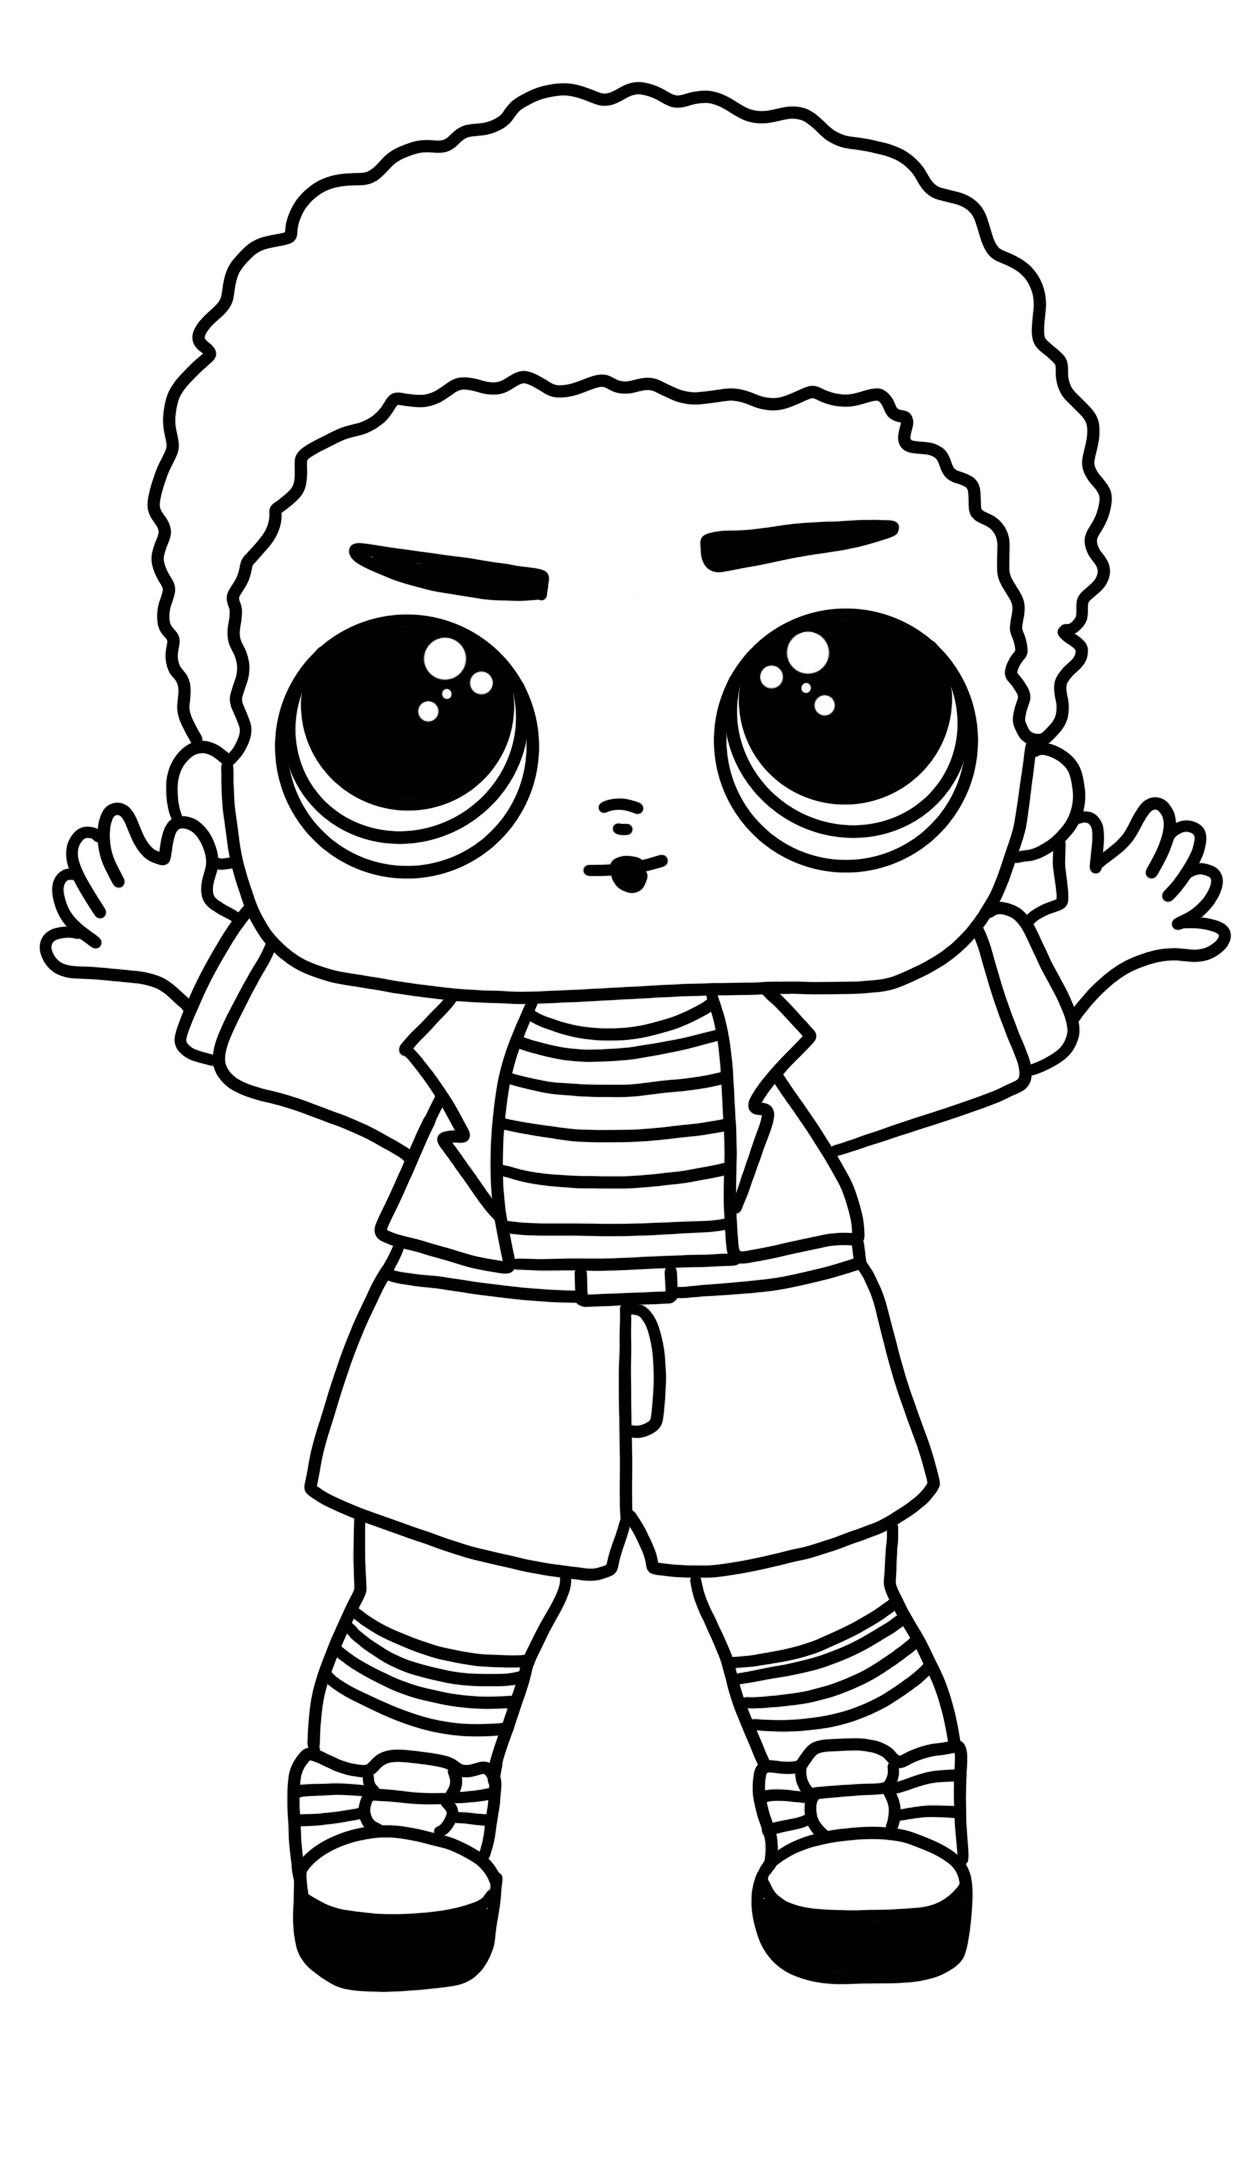 Coloring Pages : Colouring Pictures Lol Dolls Awesome Punk Boy Lol